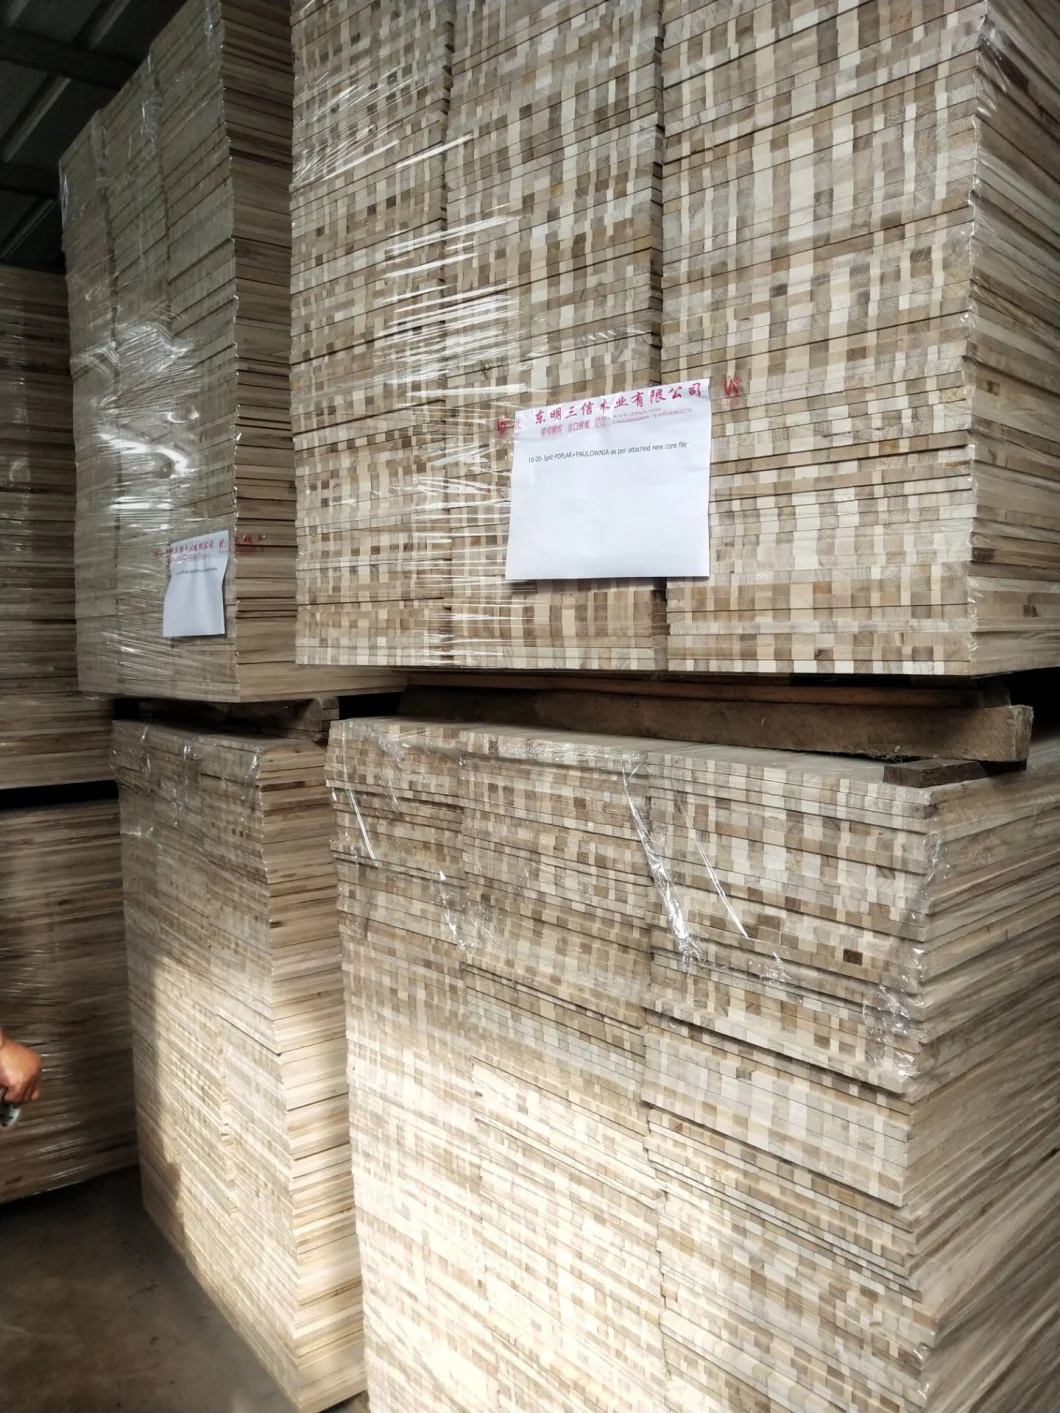 20 mm Width of Strips Laminated Paulownia Wood Timber Core for Surfboard